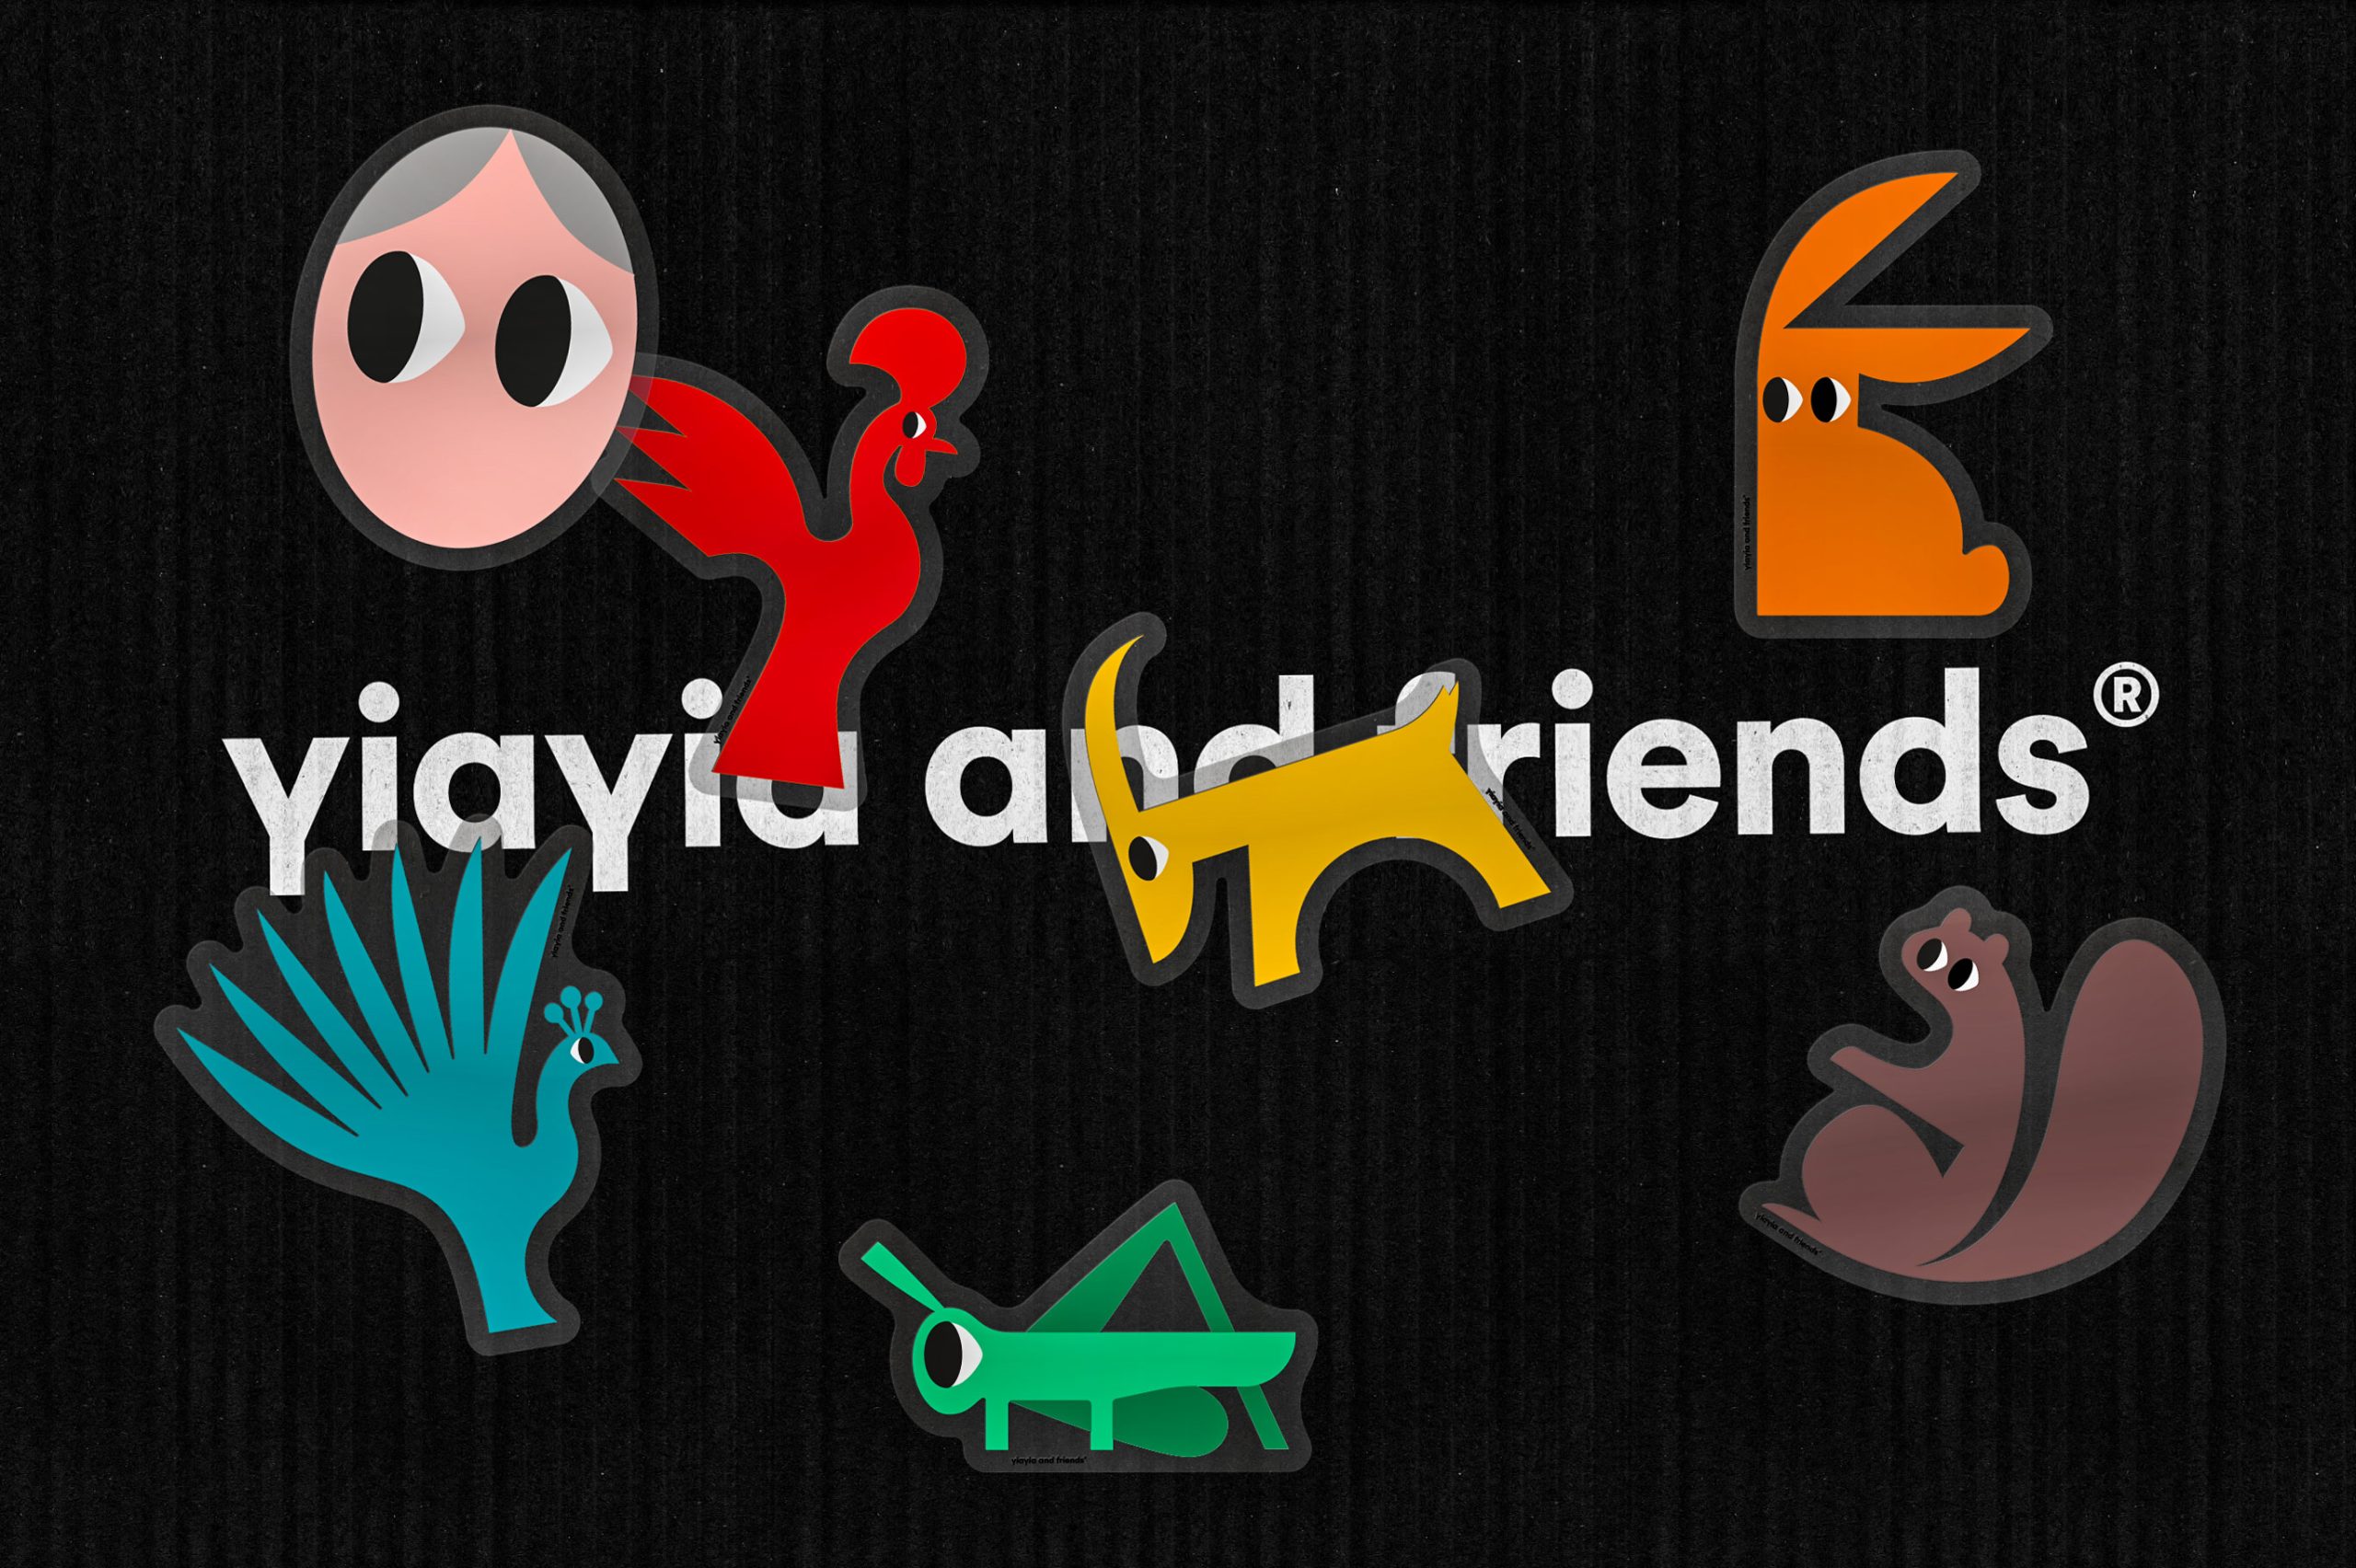 Yiayia and friends sticker illustration